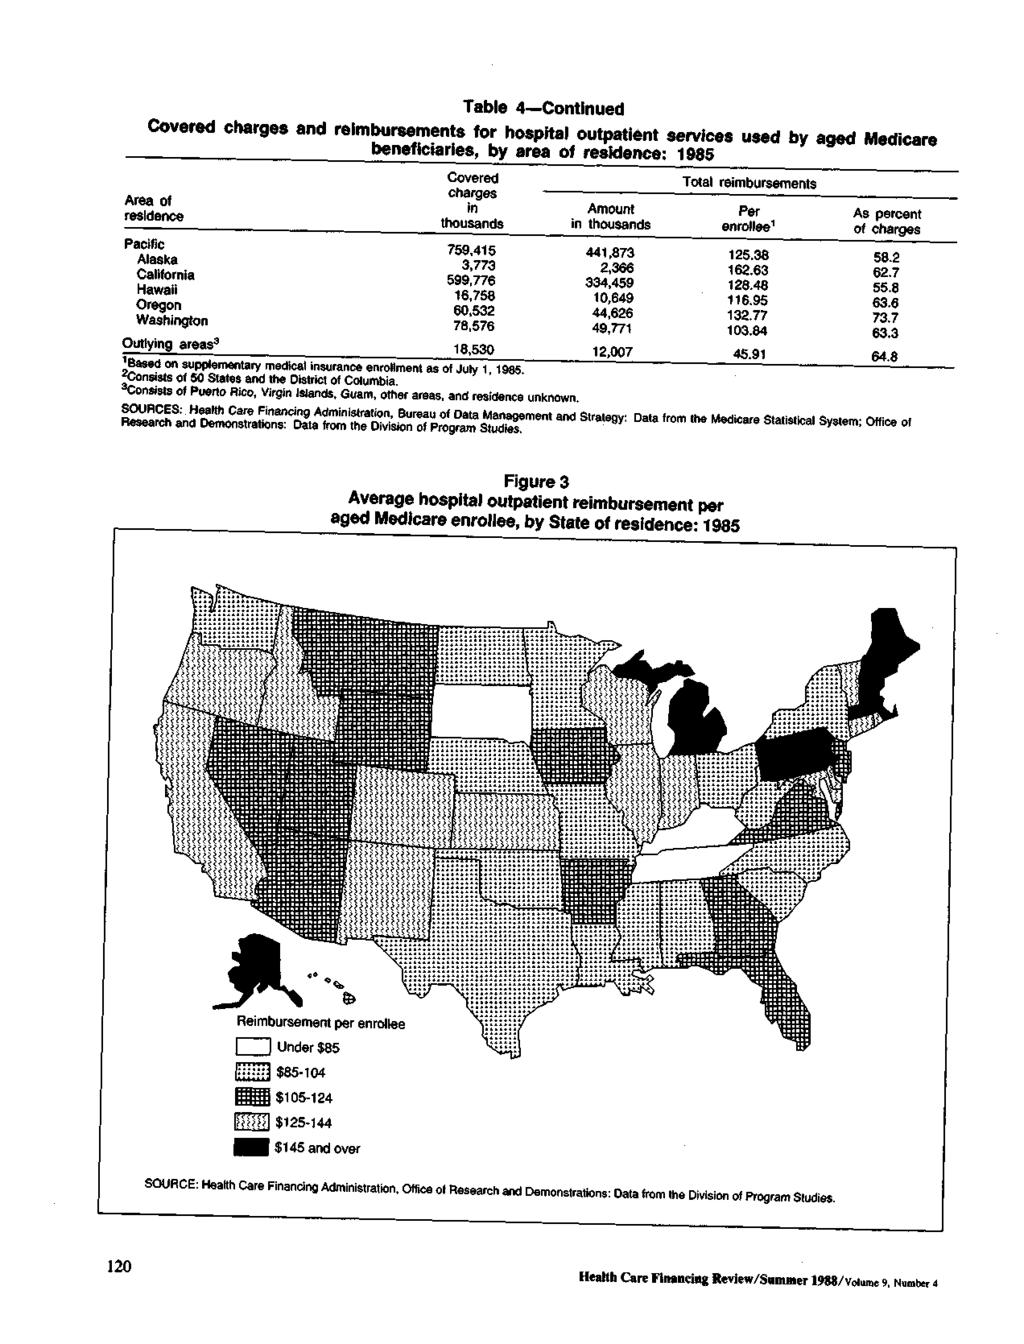 Table 4Contued Covered charges and reimbursements for hospital outpatient services used by aged Medicare beneficiaries, by area of residence: 1985 Area of residence Pacific Alaska California Hawaii